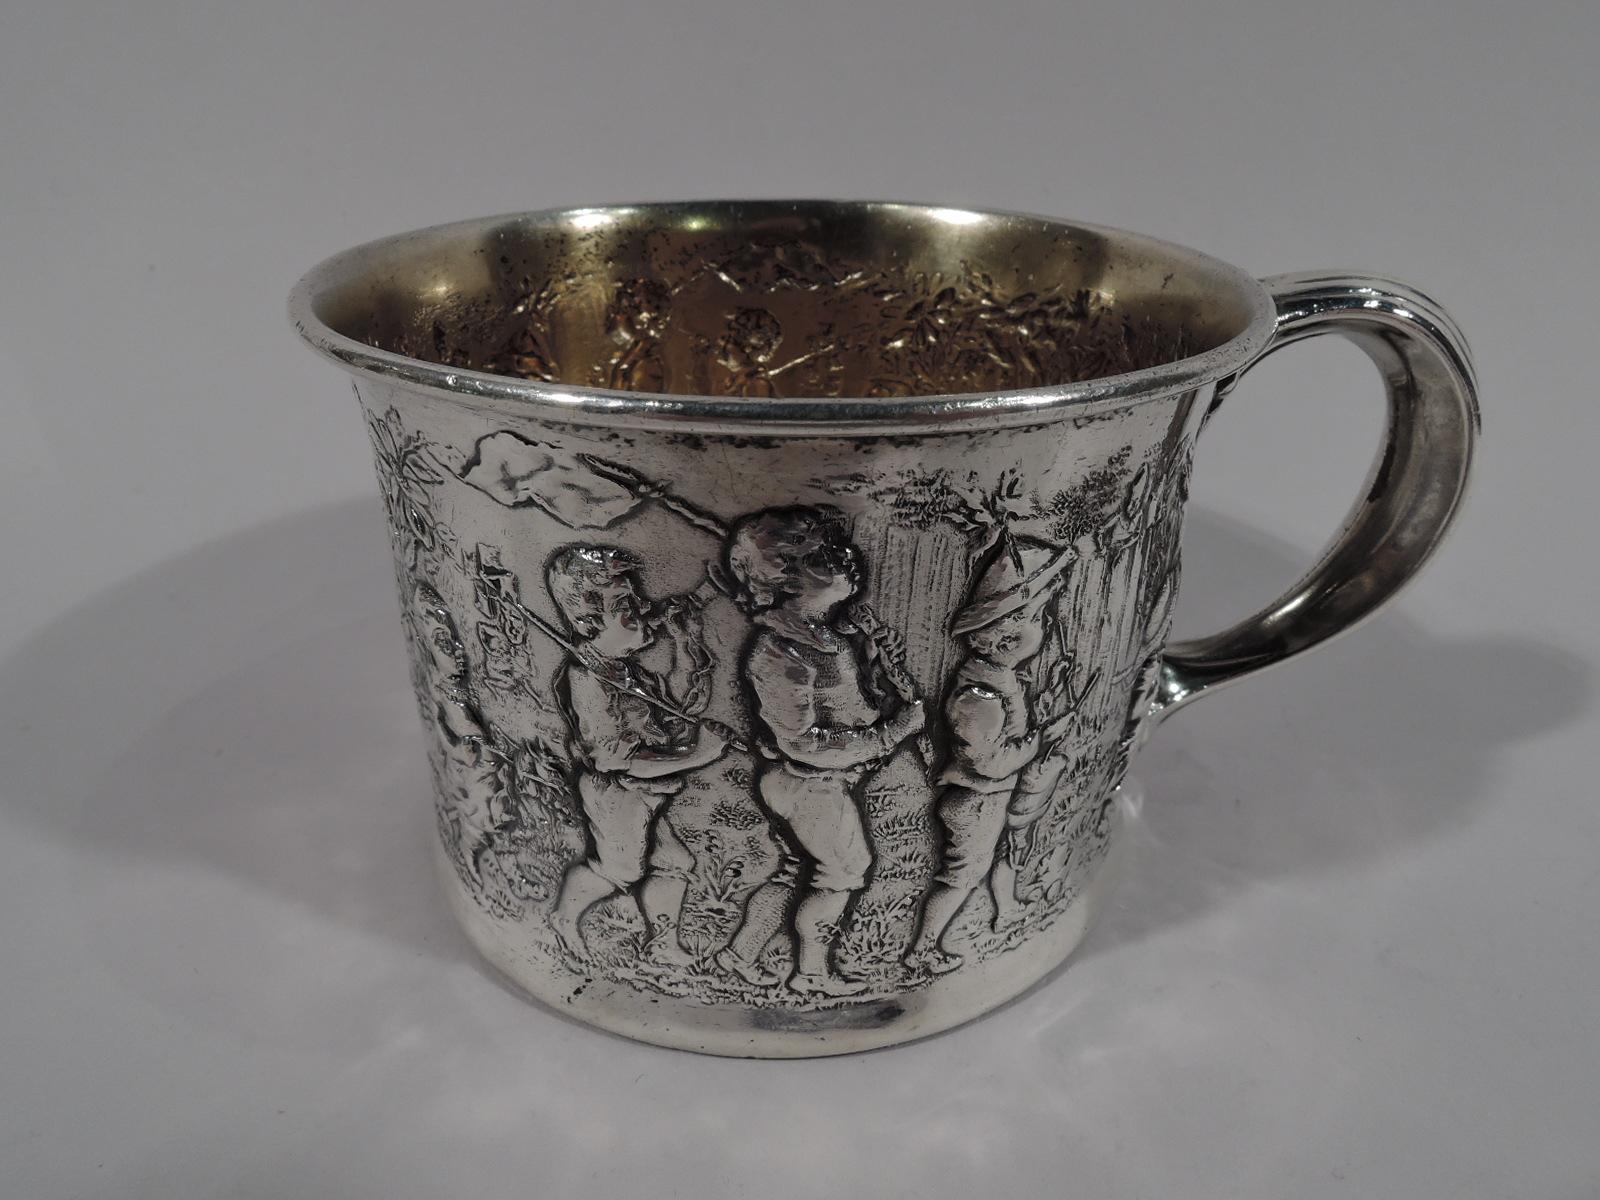 Edwardian sterling silver pictorial baby cup. Made by Gorham in Providence, circa 1920. Straight sides and reeded C-scroll handle. Interior gilt washed. Chased scene of boy’s procession marching single file: The cavalry, in the person of a